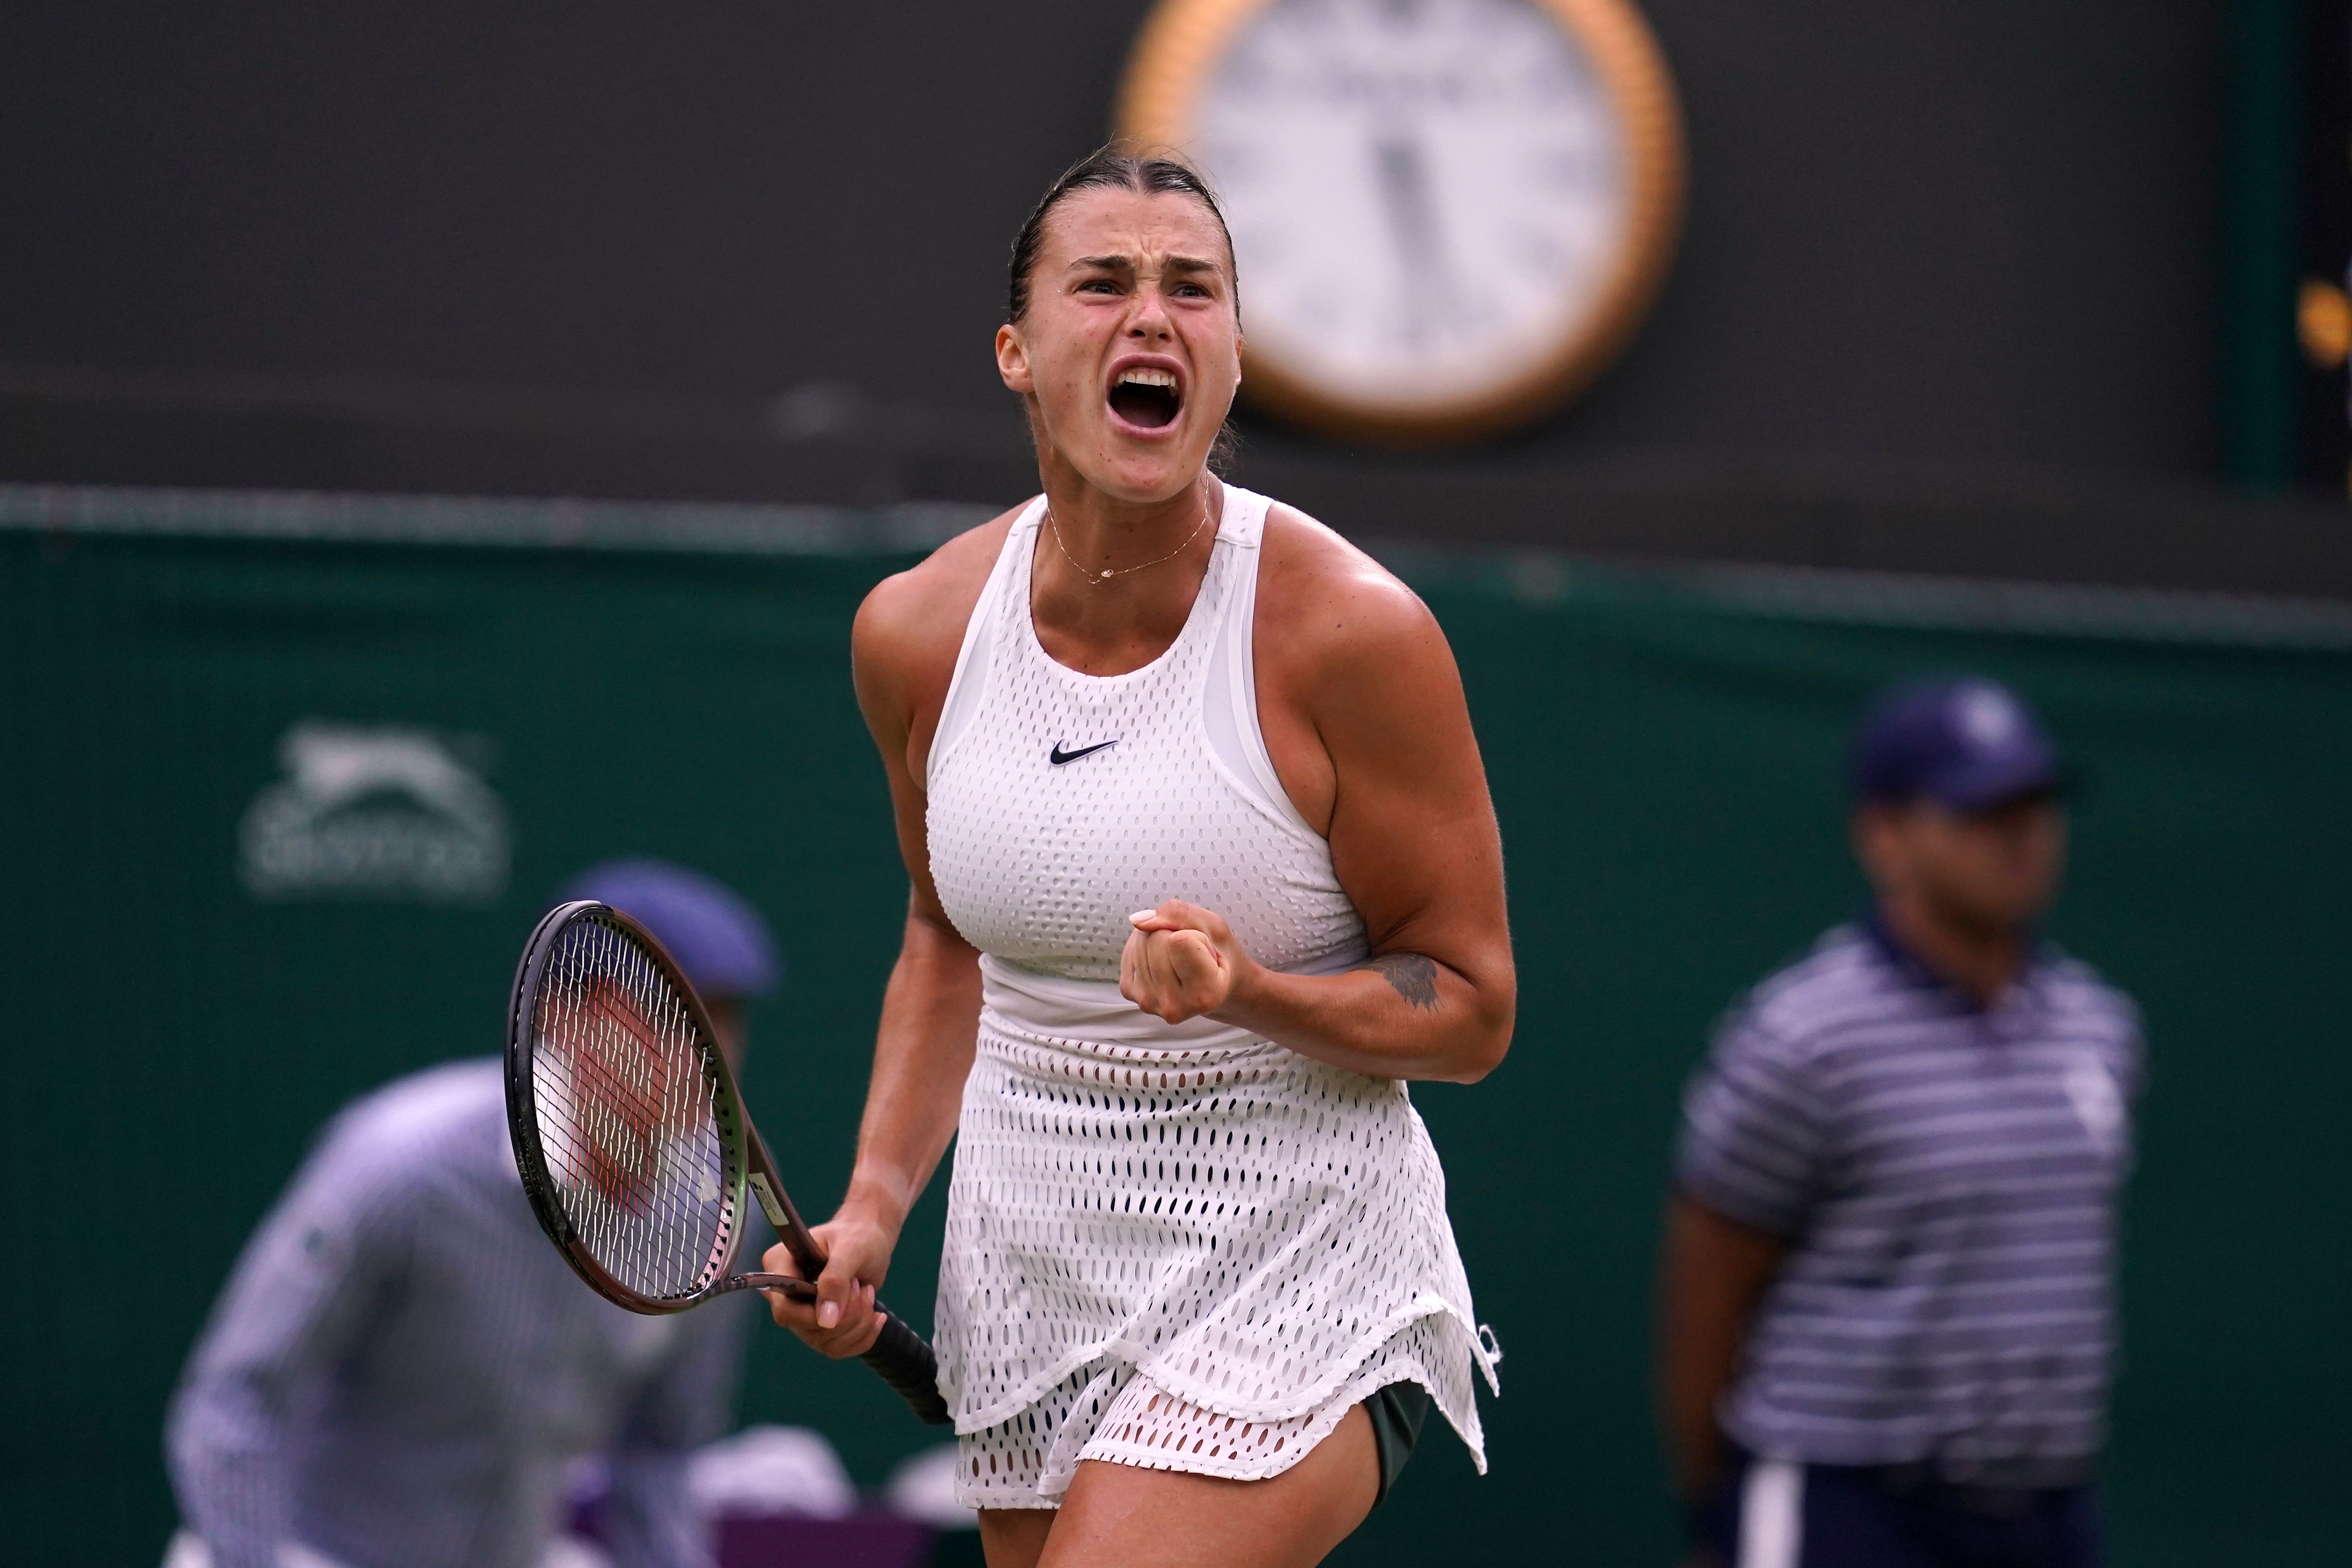 Aryna Sabalenka reached the fourth round of Wimbledon for the second time (Victoria Jones/PA)